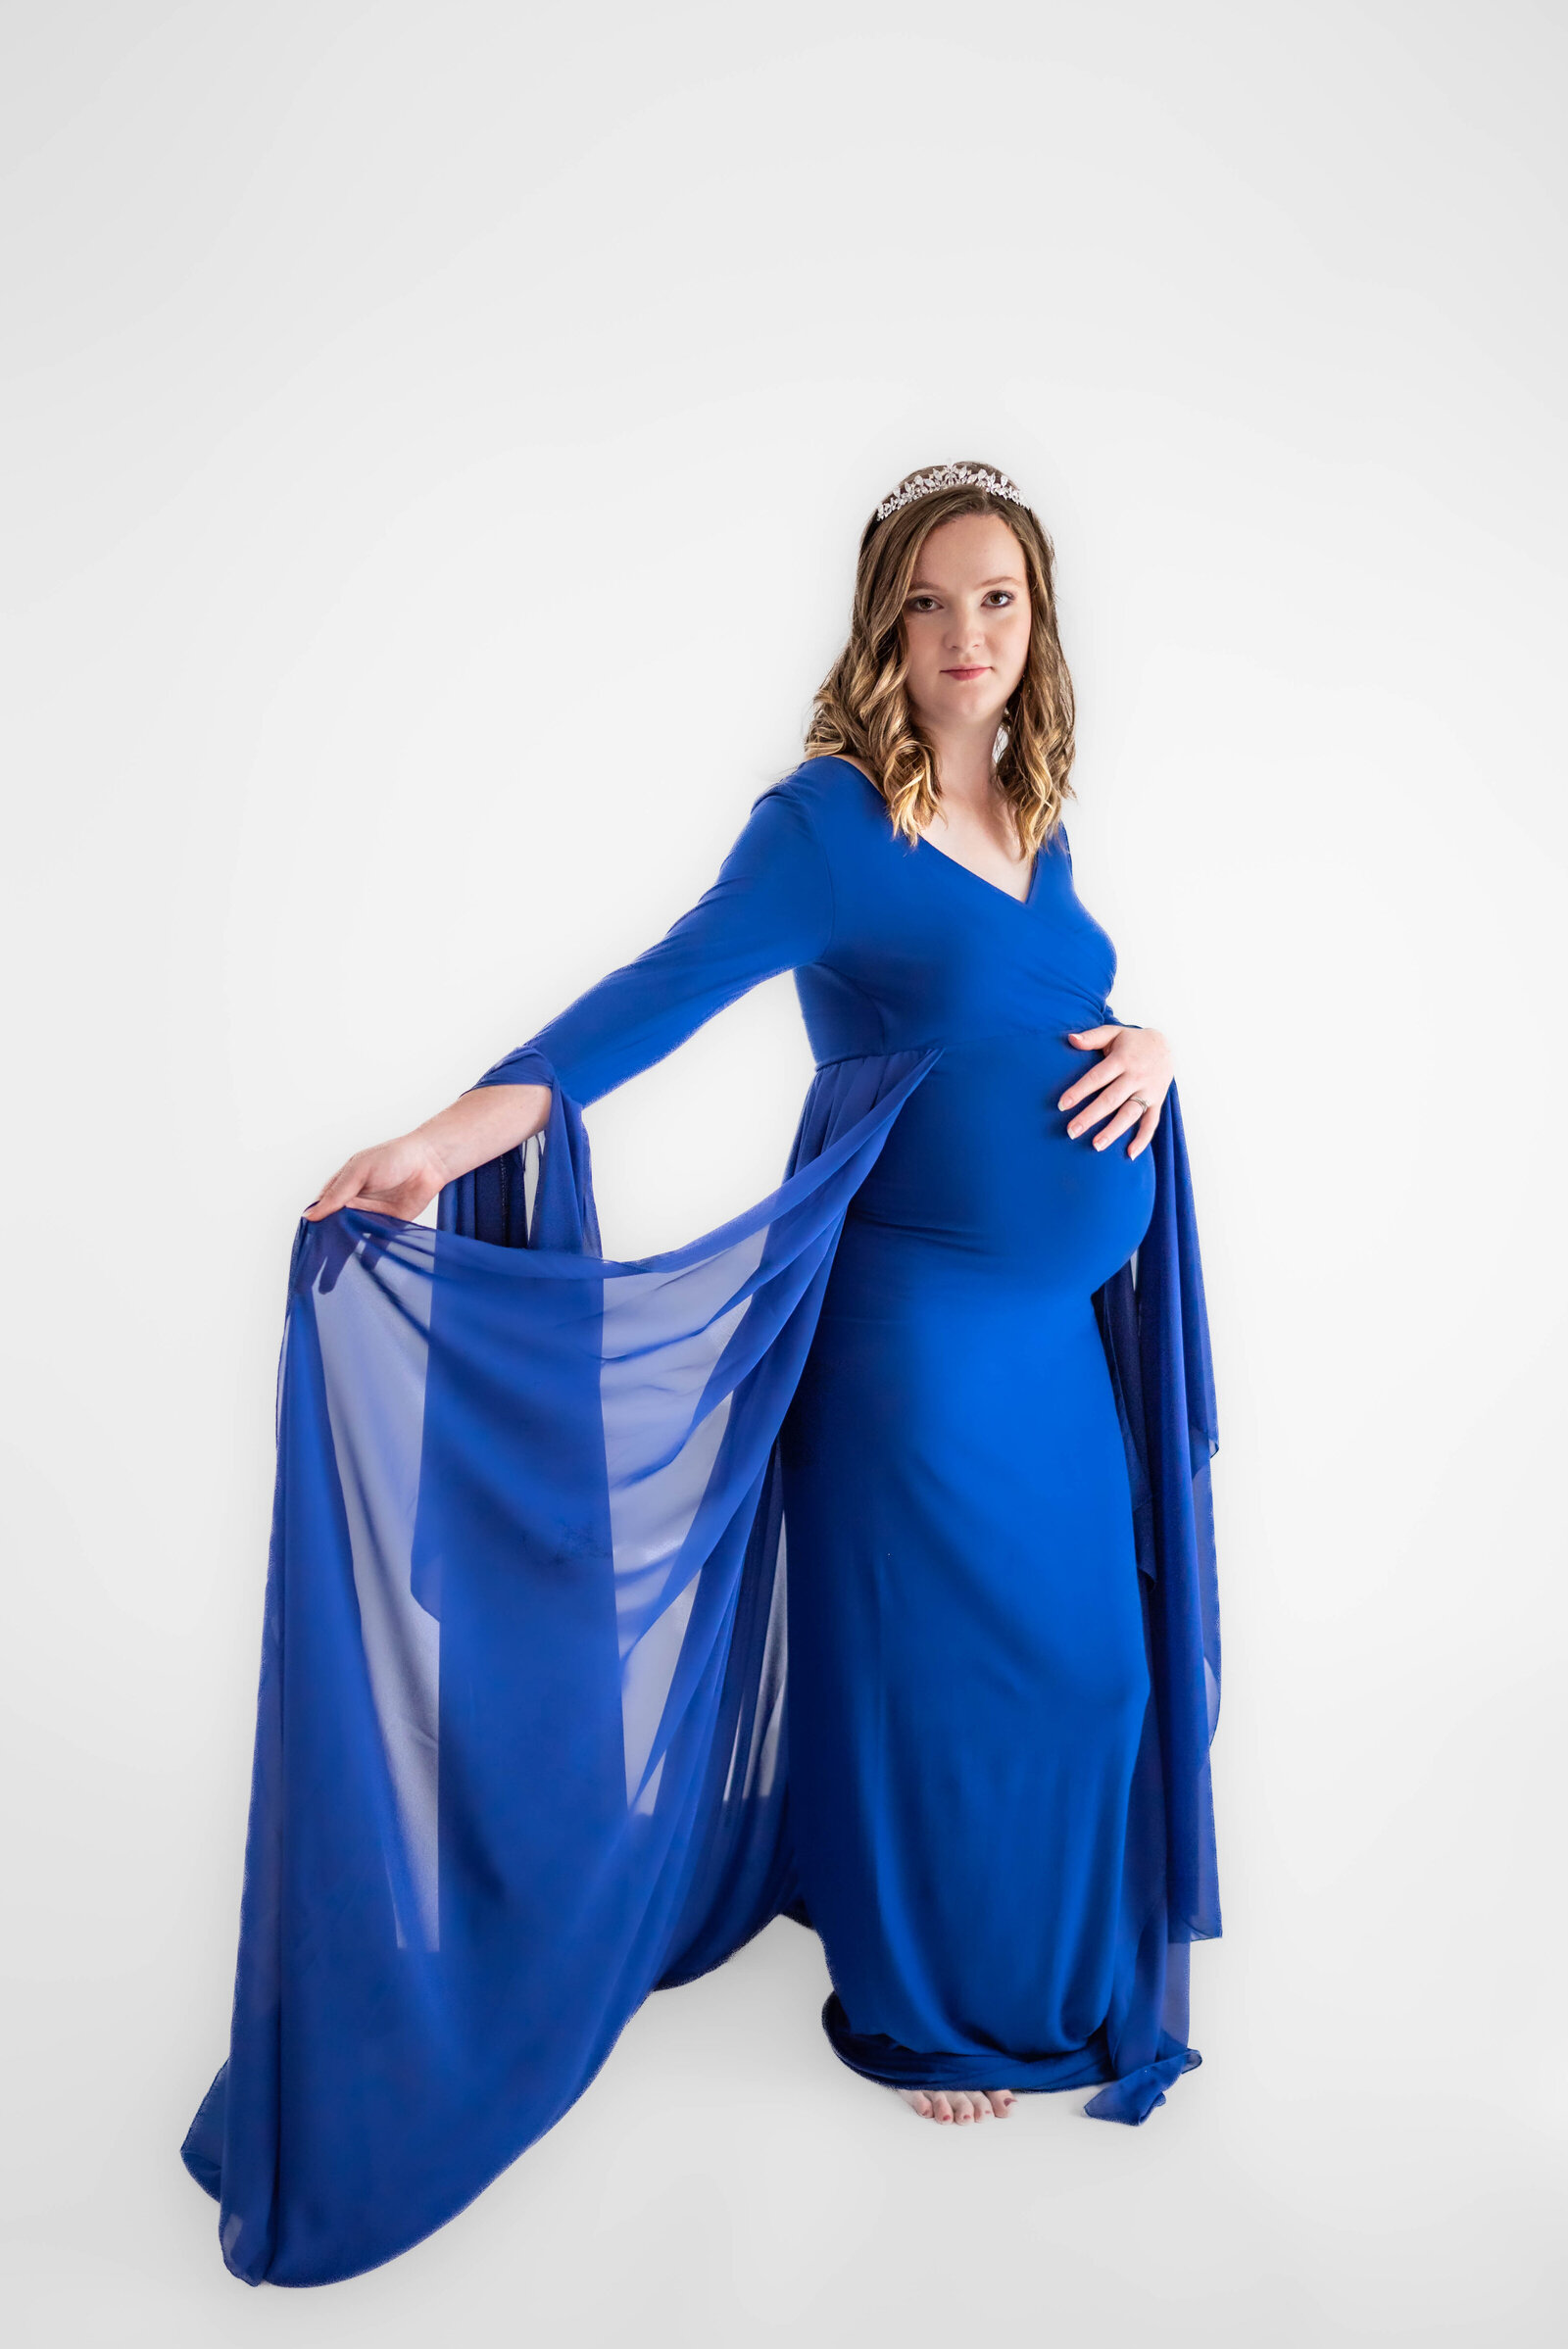 A pregnant woman in a royal blue dress  holding her stomach and posing for her maternity photos in Huntsville Alabama